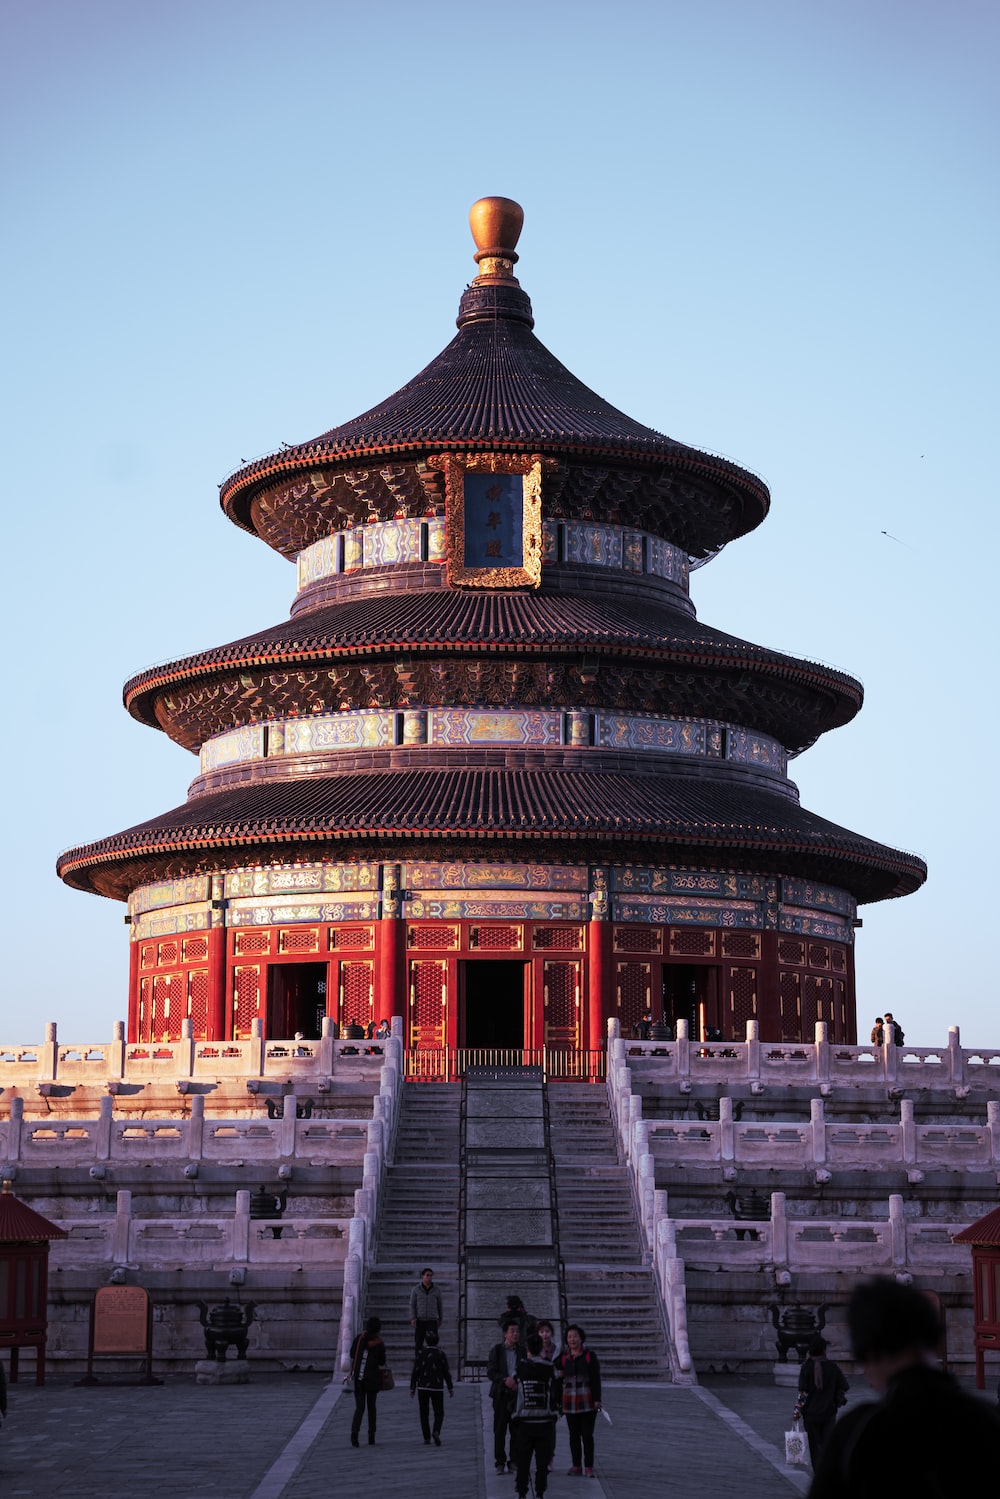 Temple Of Heaven Picture. Download Free Image